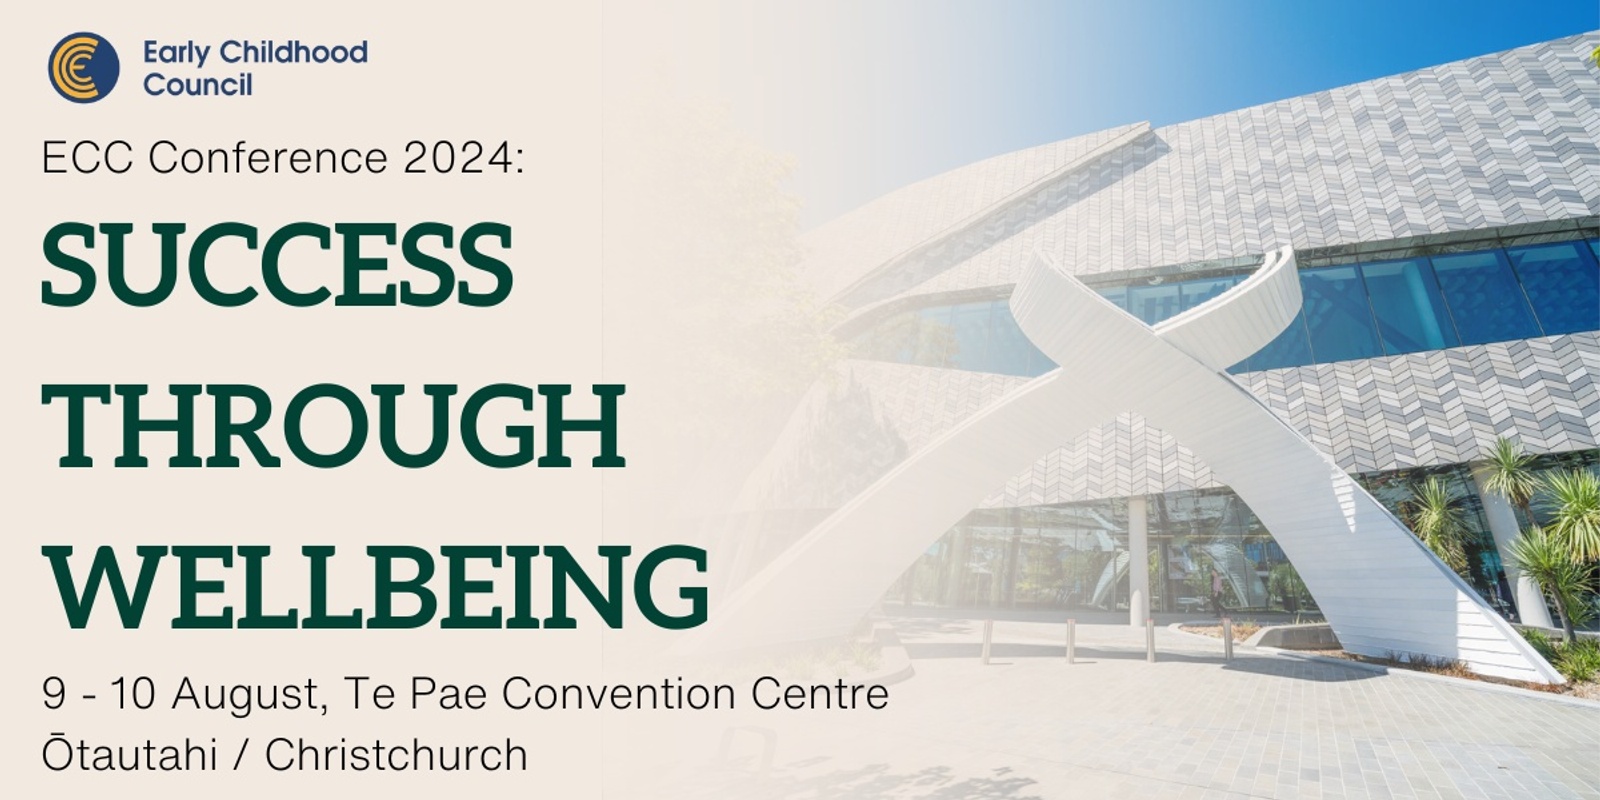 ECC Conference 2024 Success Through Wellbeing Humanitix